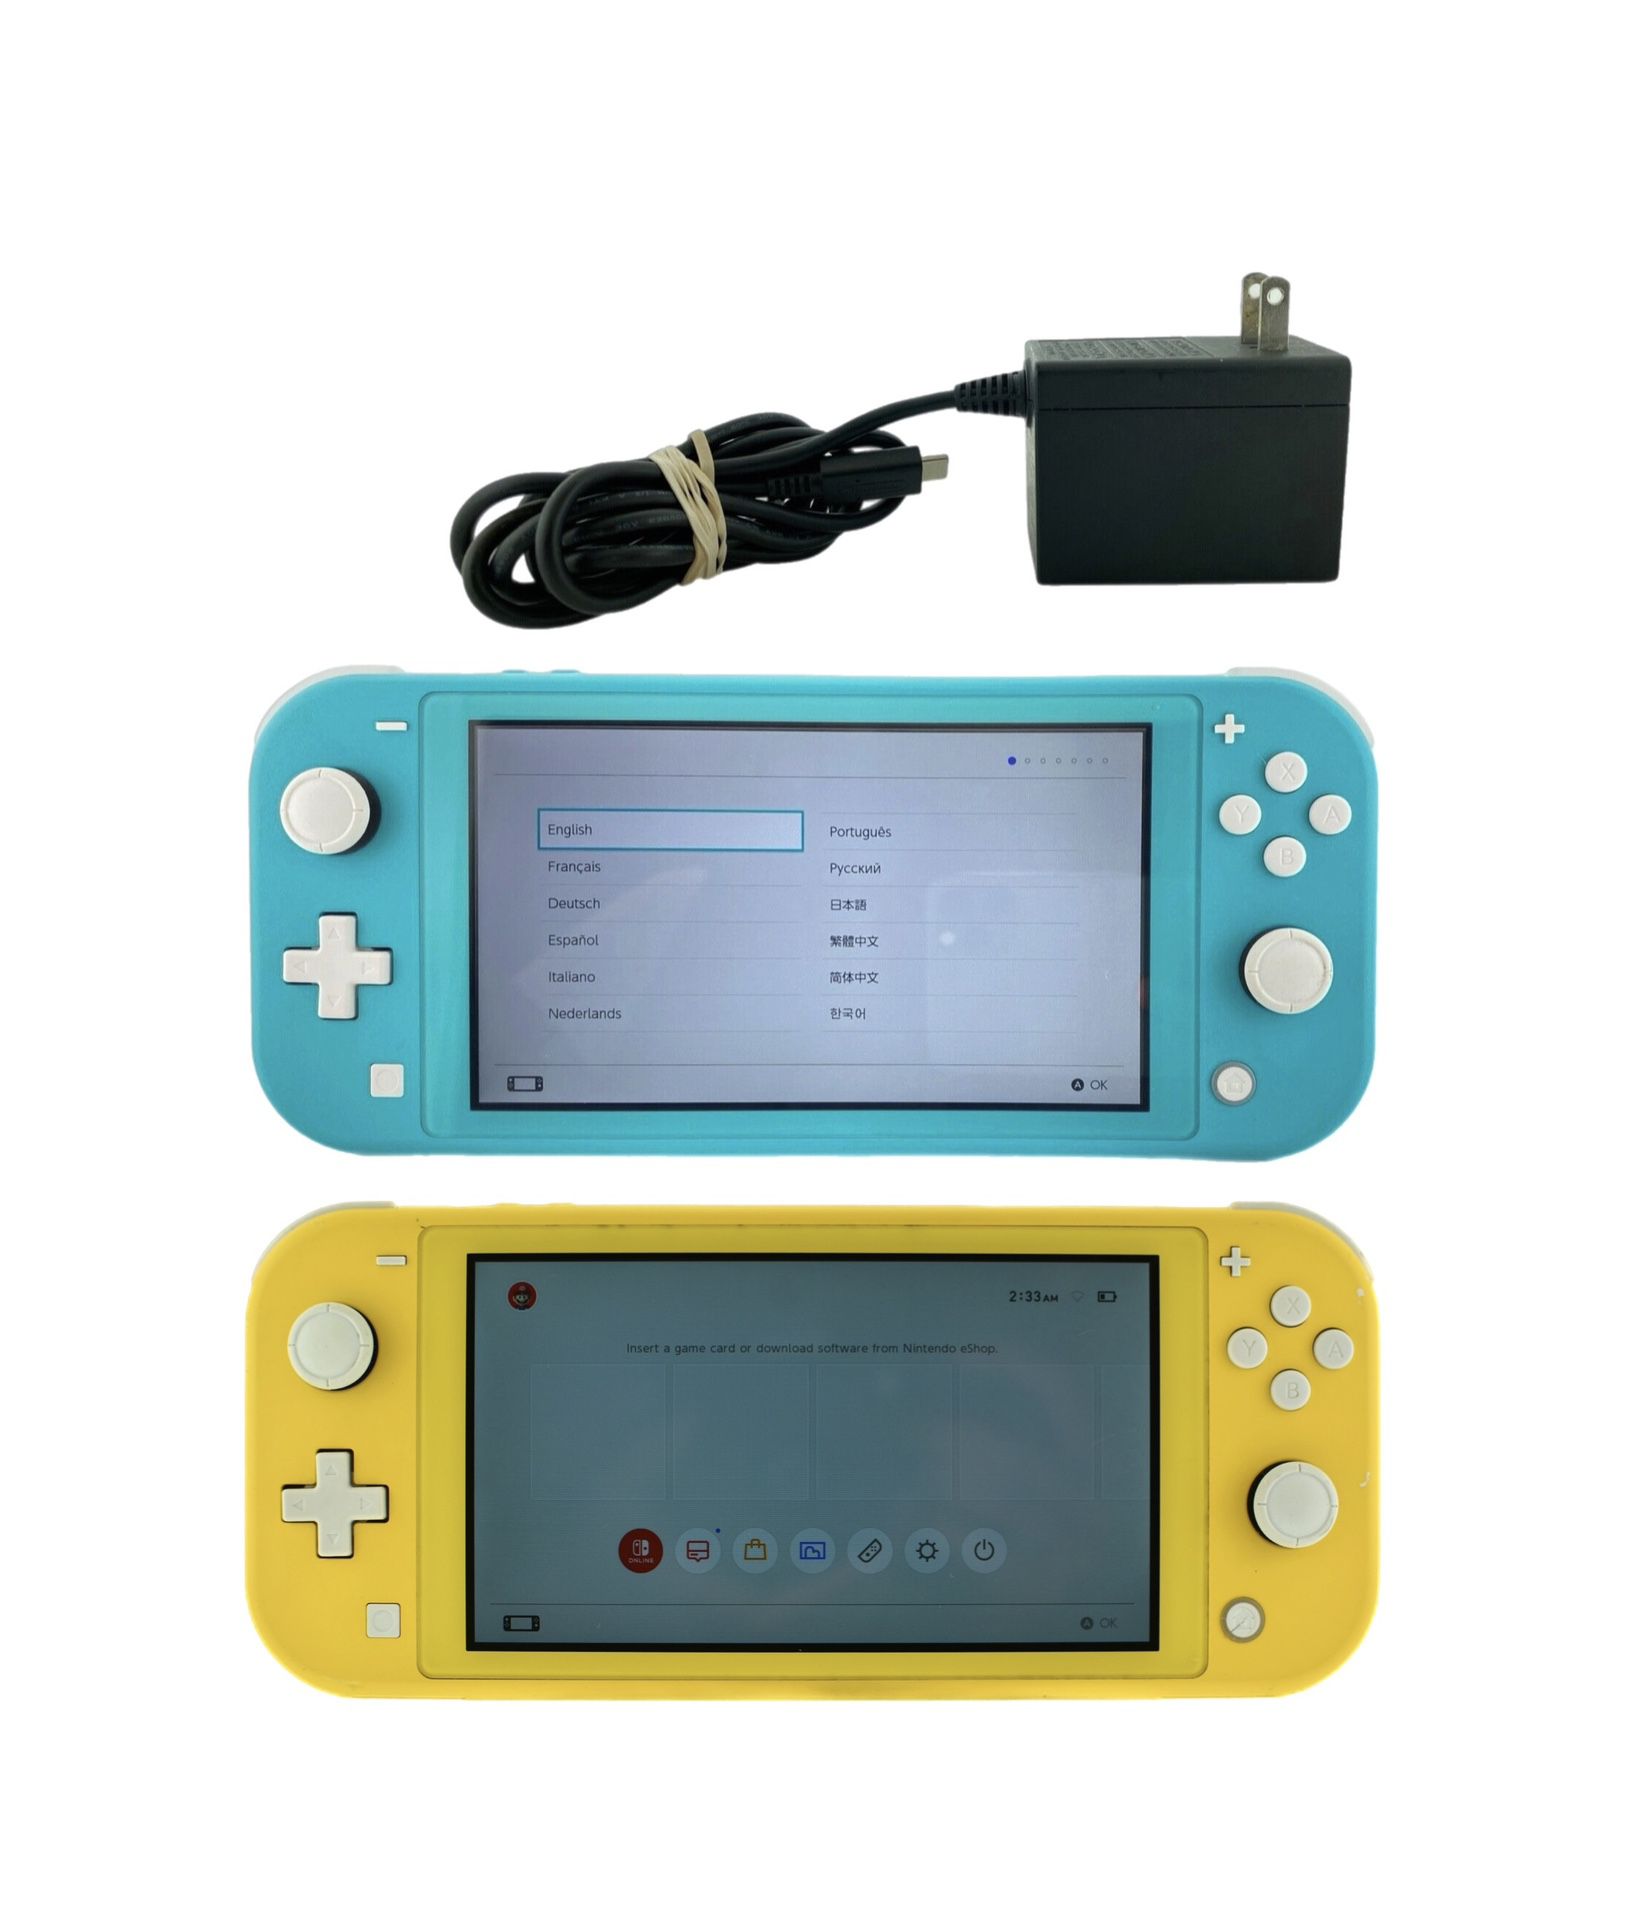 Nintendo Switch Lite Video Game Console Turquoise with Charger and Yellow Handheld System HDH-001 - PRICE FOR EACH READ IN DESCRIPTION